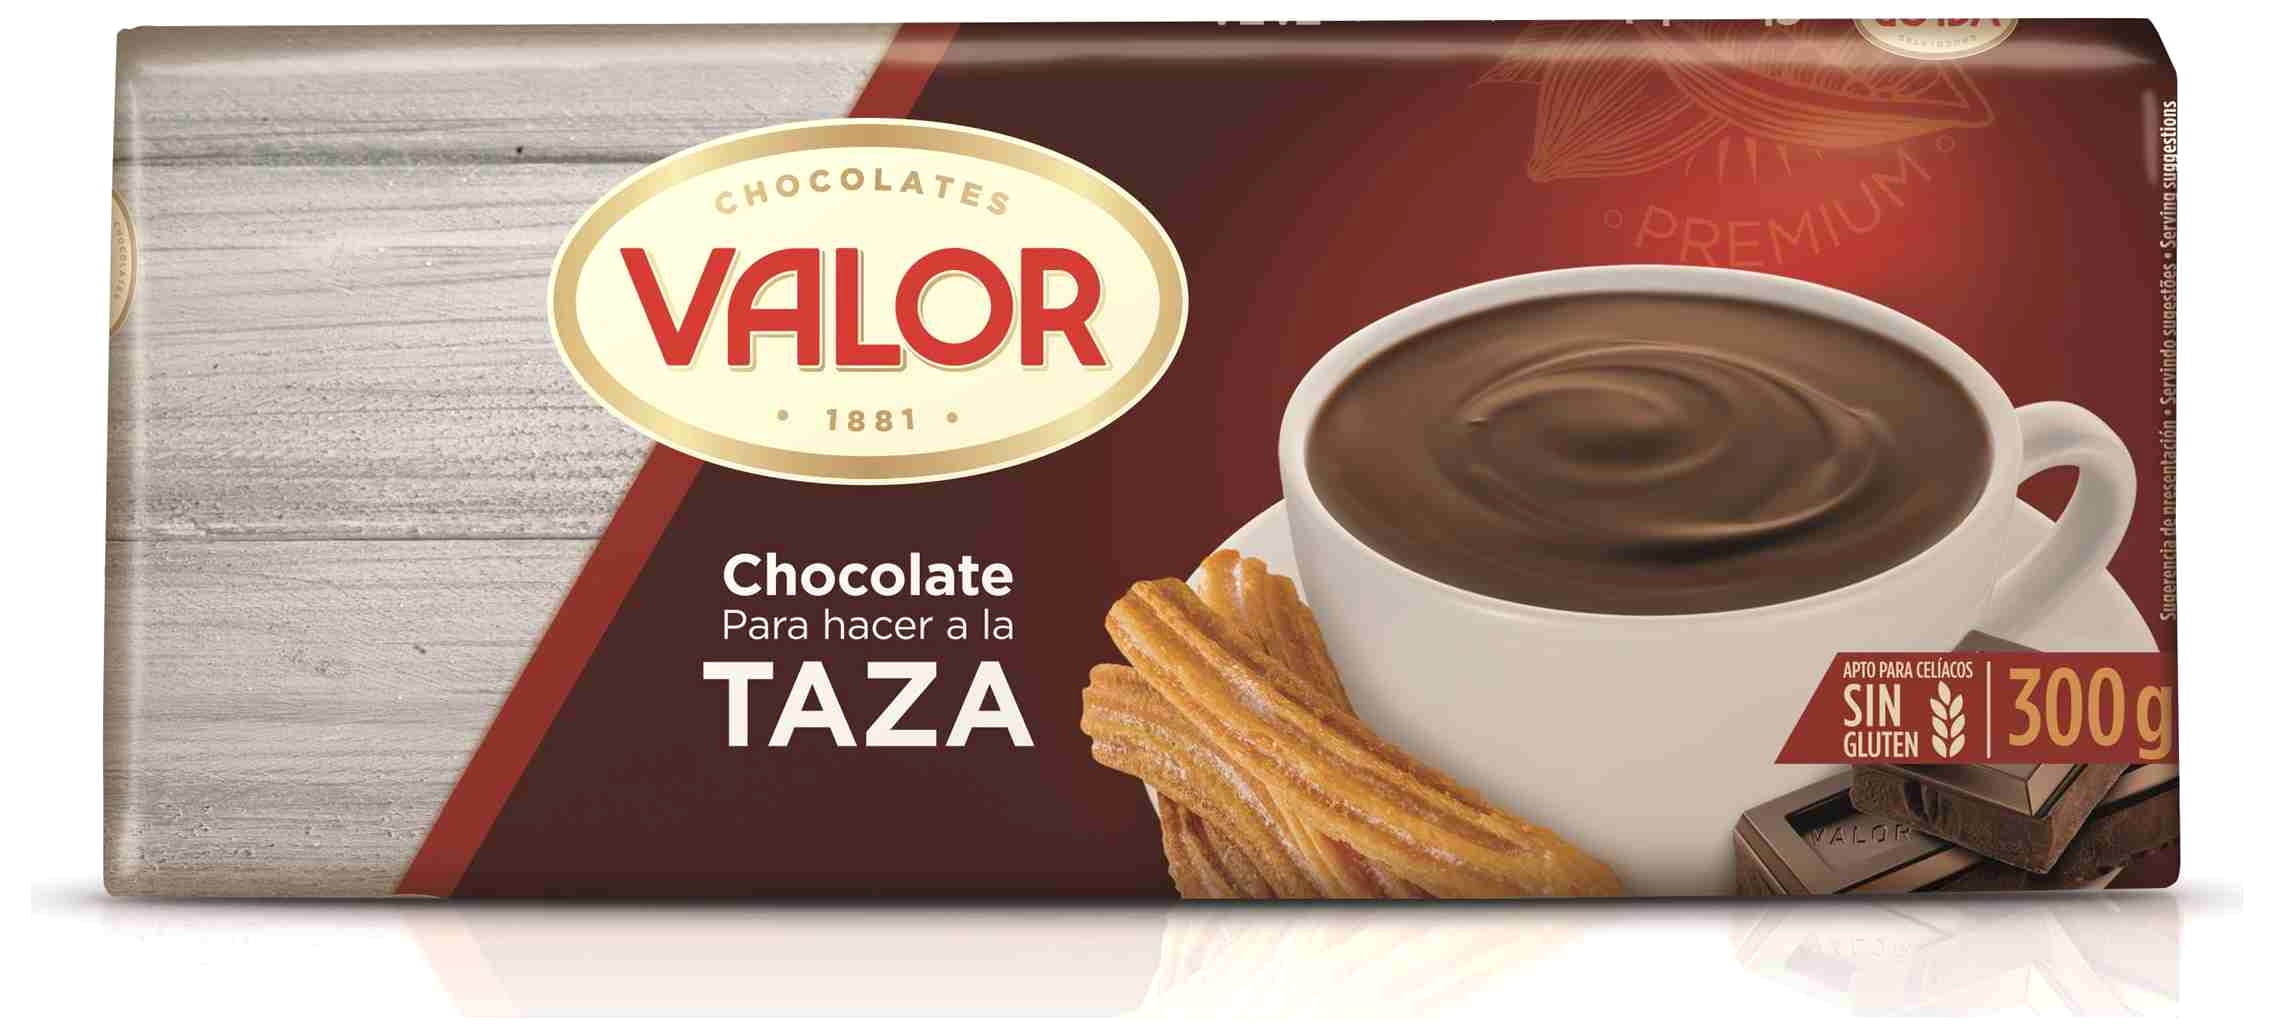 Valor Chocolate a la Taza bar from Spain (makes 8 cups, 10.5 oz/300 gr) 